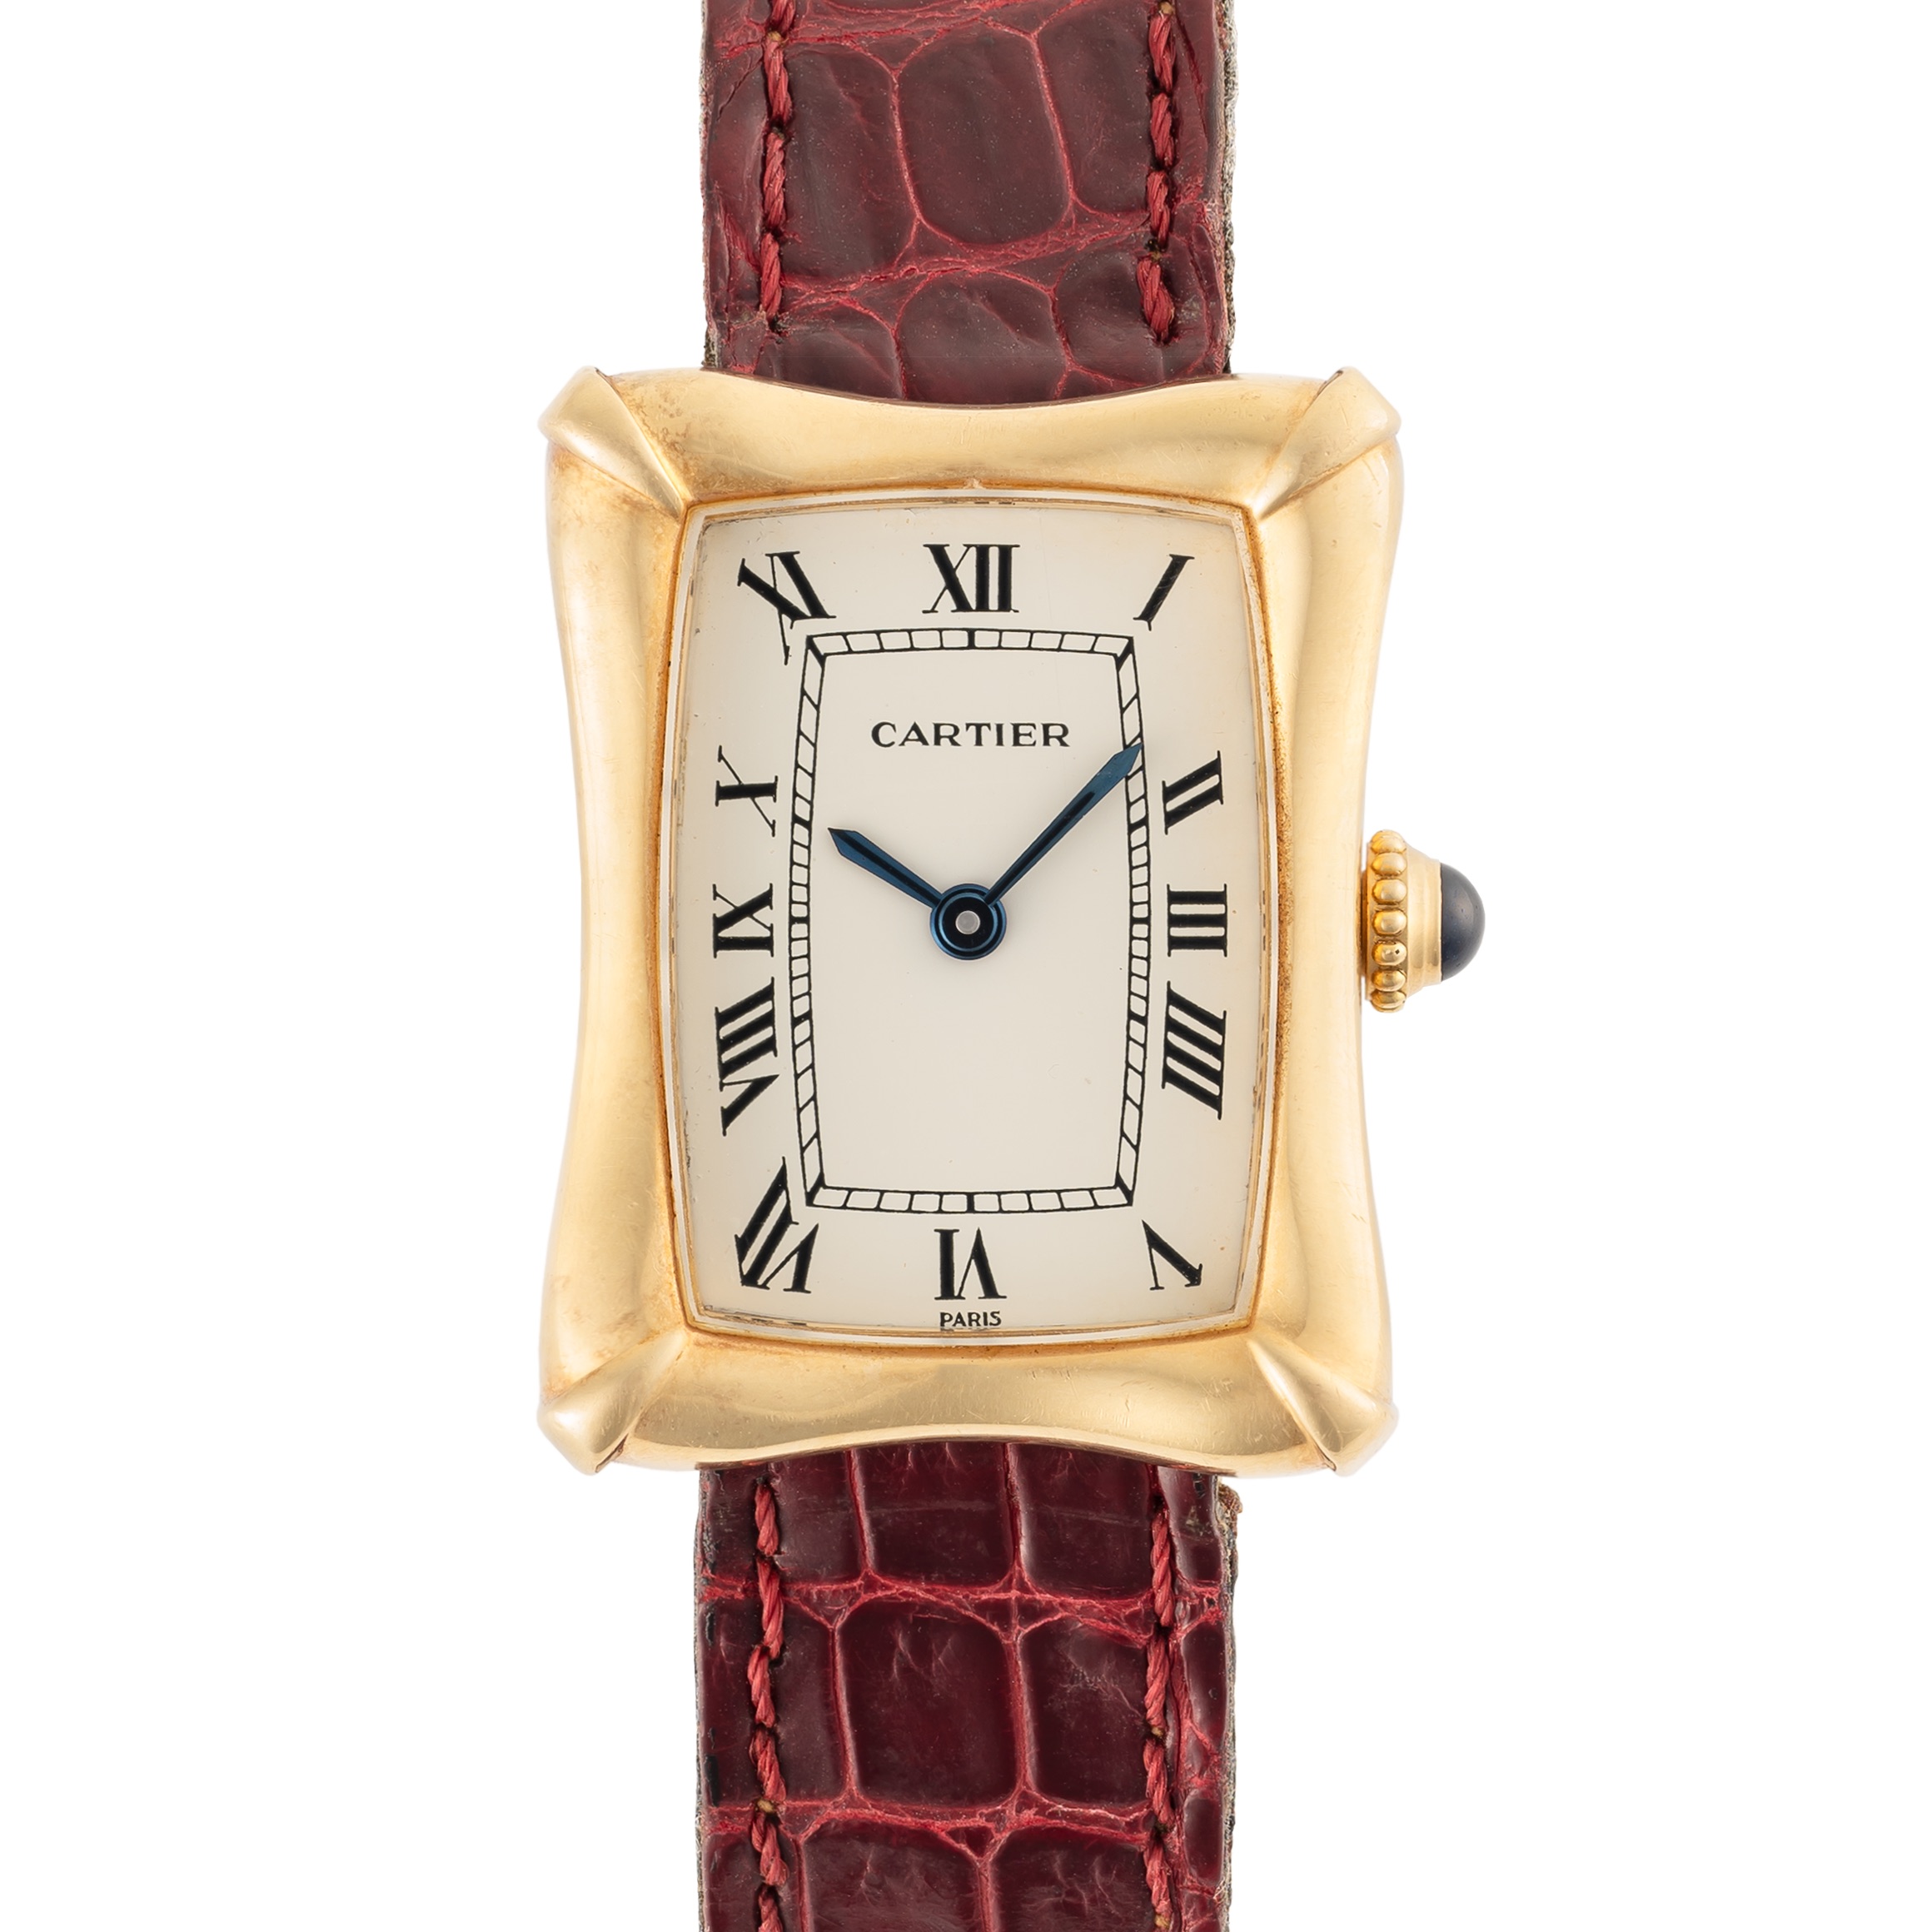 A VERY RARE LADY'S 18K SOLID GOLD CARTIER PARIS BAMBOO COUSSIN WRIST WATCH CIRCA 1970s, REF. 78110 - Image 10 of 10